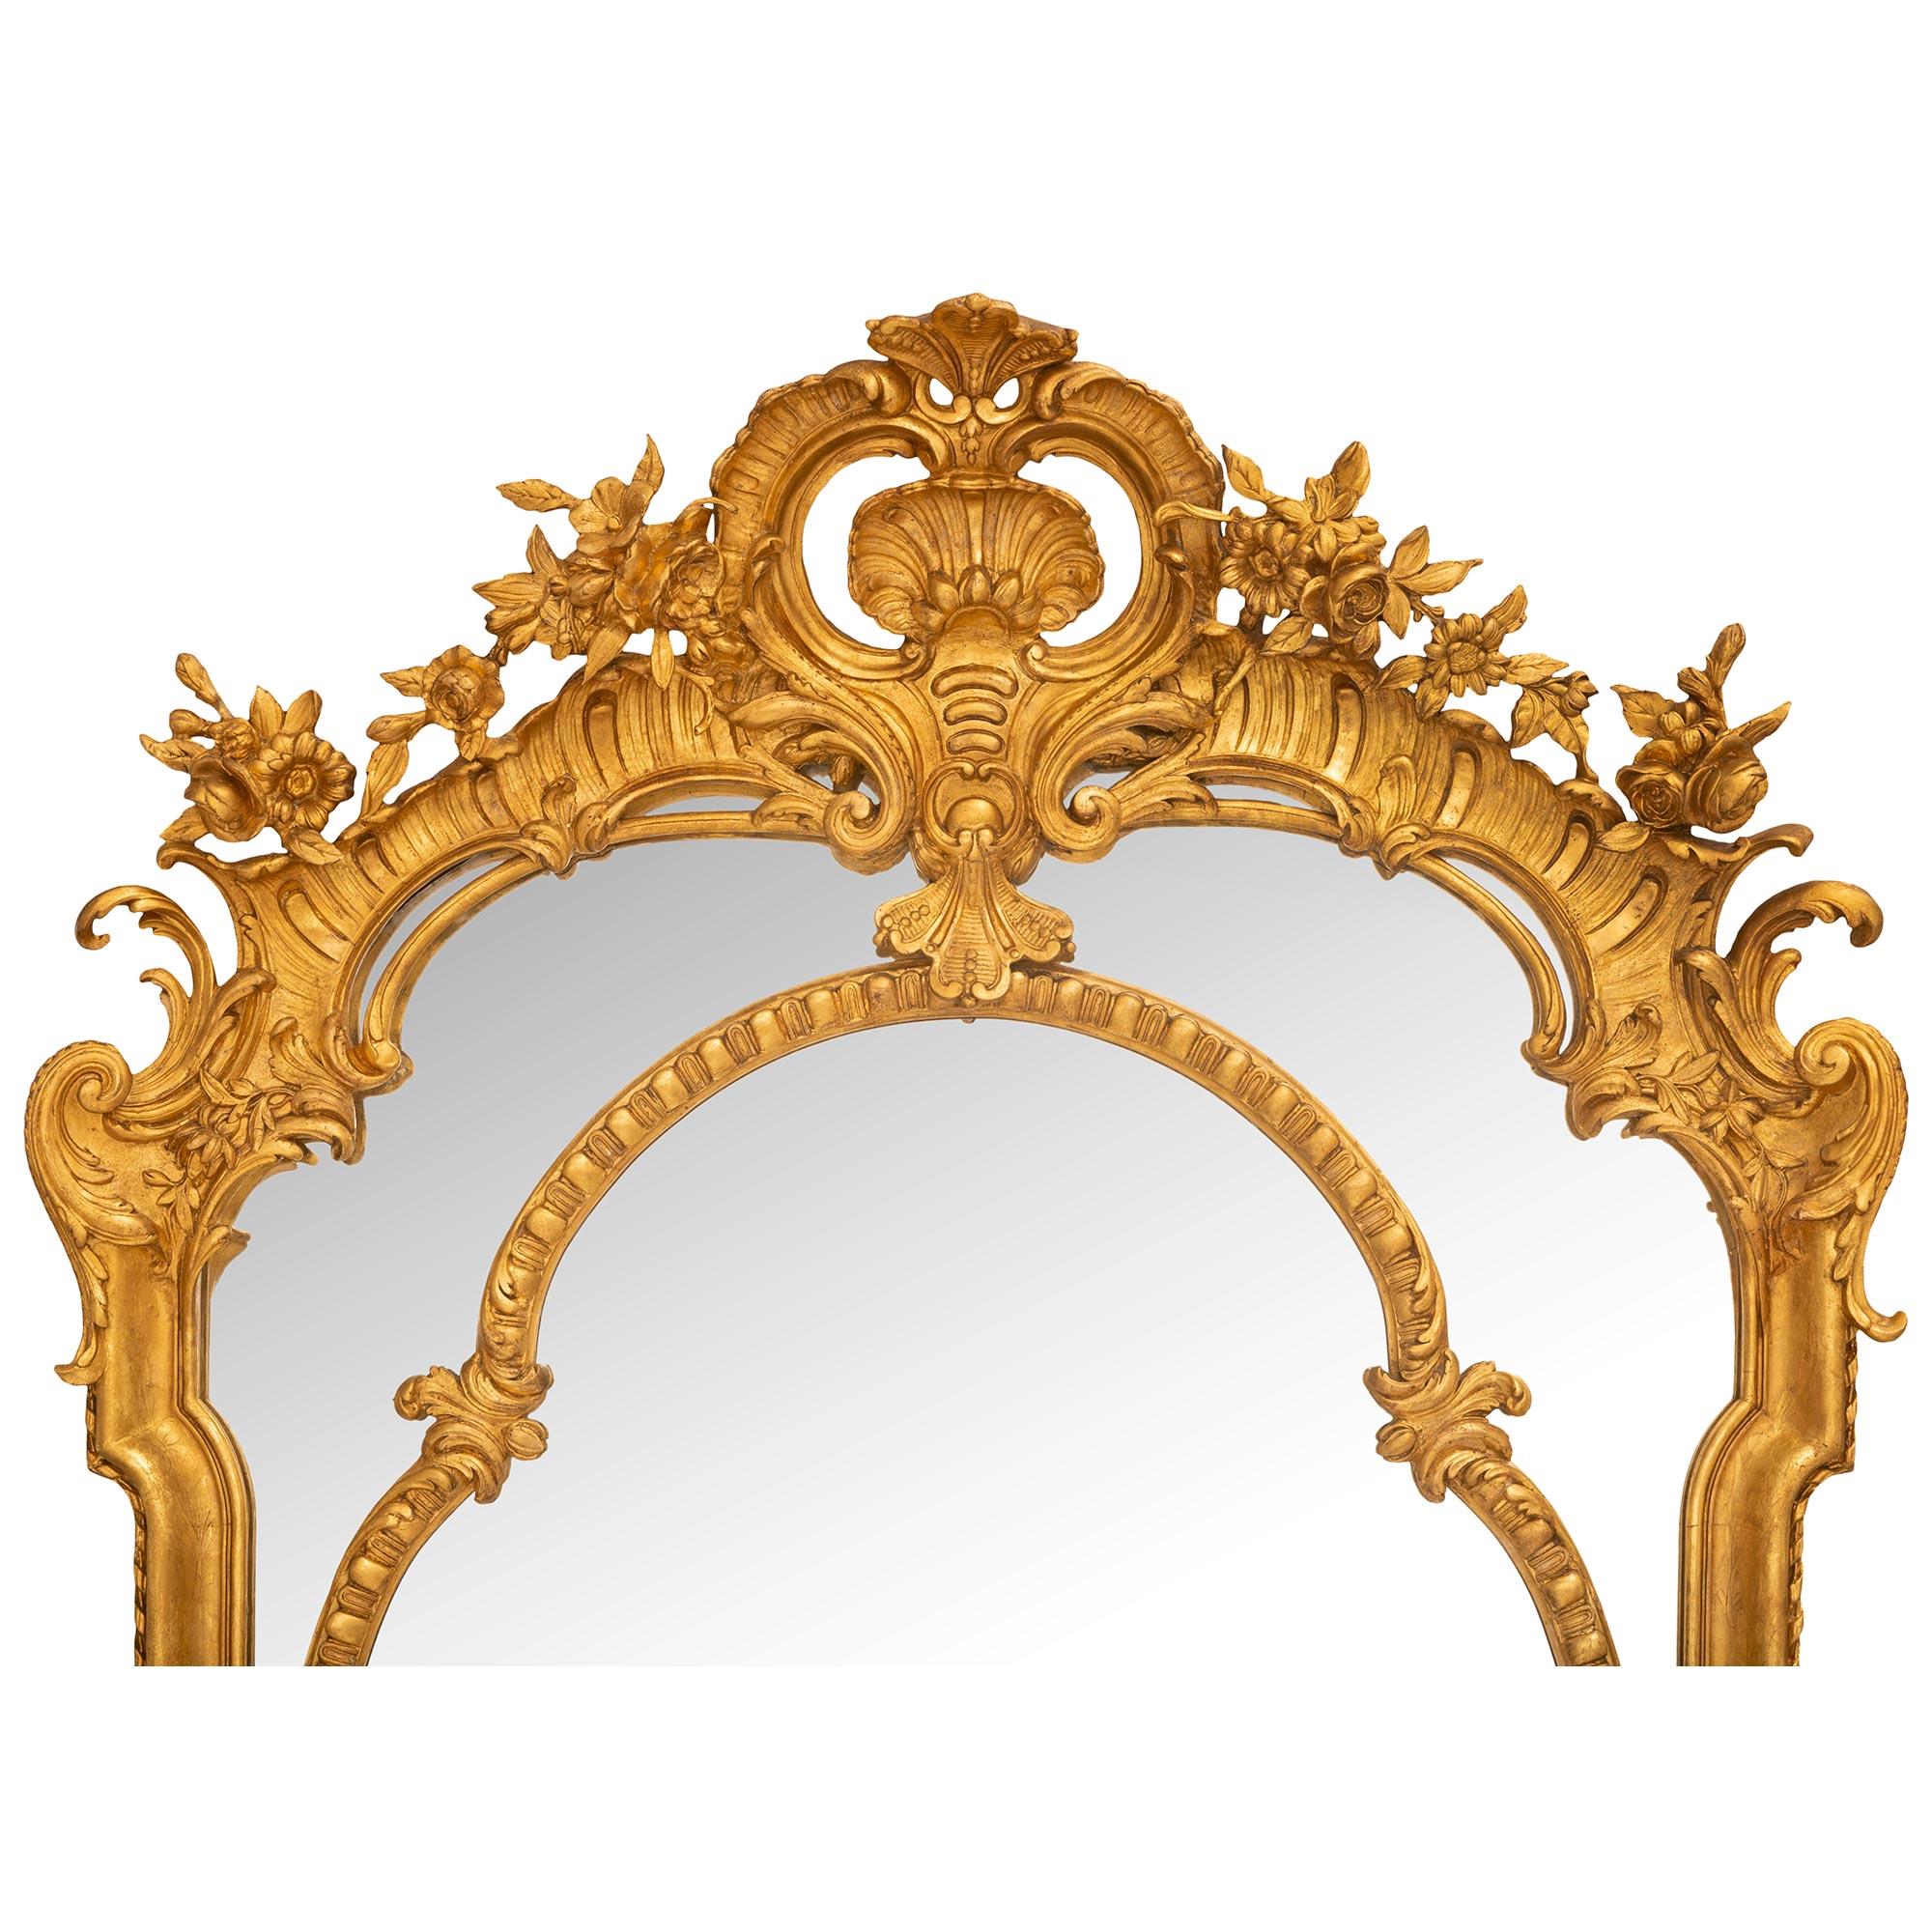 A striking and most impressive French 19th century Louis XVI st. double framed giltwood mirror. The mirror retains all of its original mirror plates throughout with the central plate framed within a lovely most decorative scalloped Les Oves designs